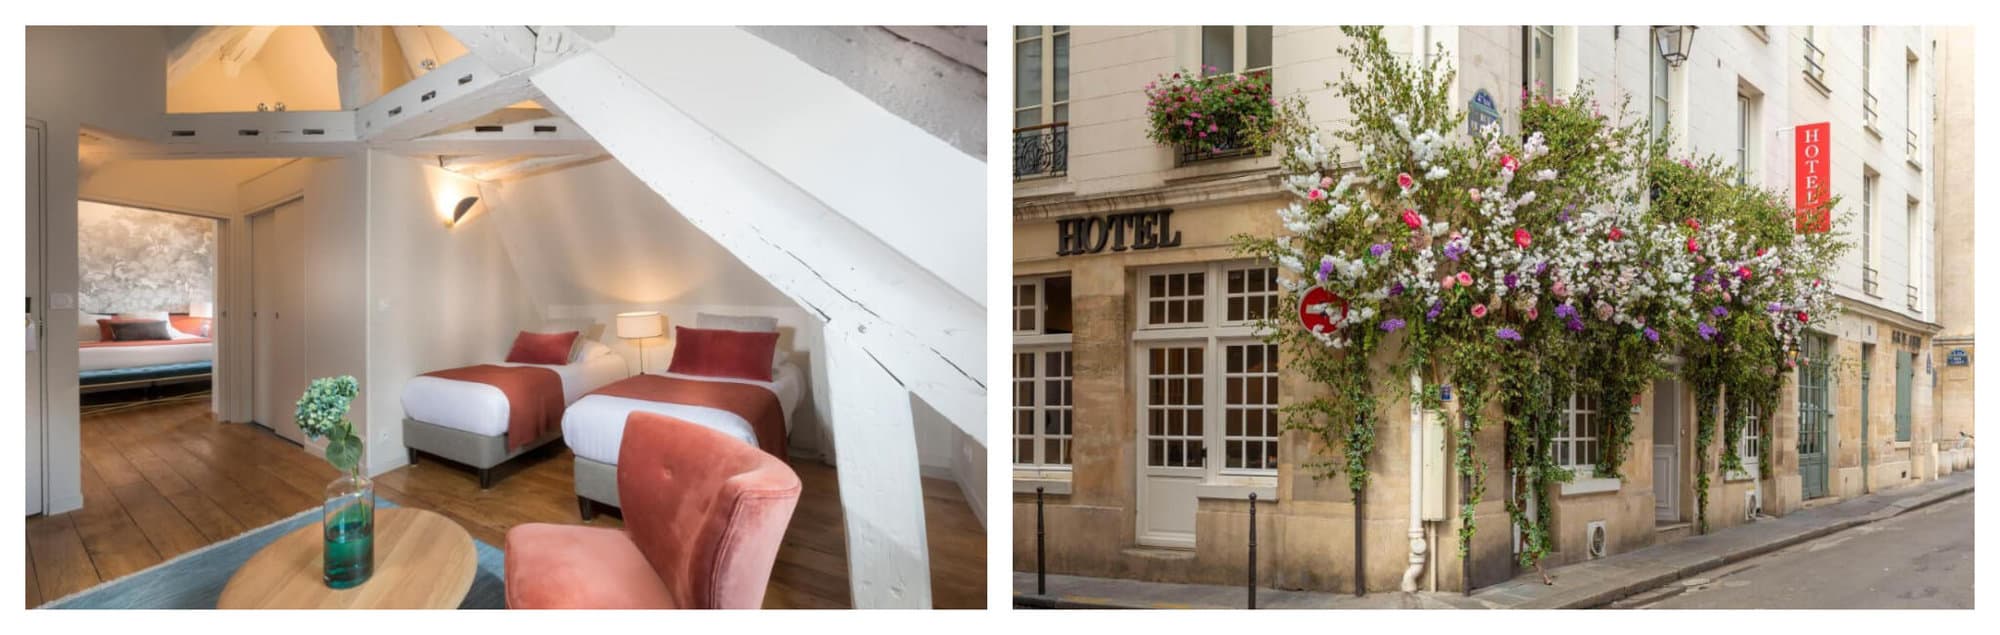 Left: Hotel Jeanne D'Arc Paris's huge suite, with a large bedroom with a king sized bed connected to a smaller bedroom with two twin sized beds; Right: Hotel Jeanne D'Arc's street view as a Parisian building with colorful flowers hanging on its beige walls. 